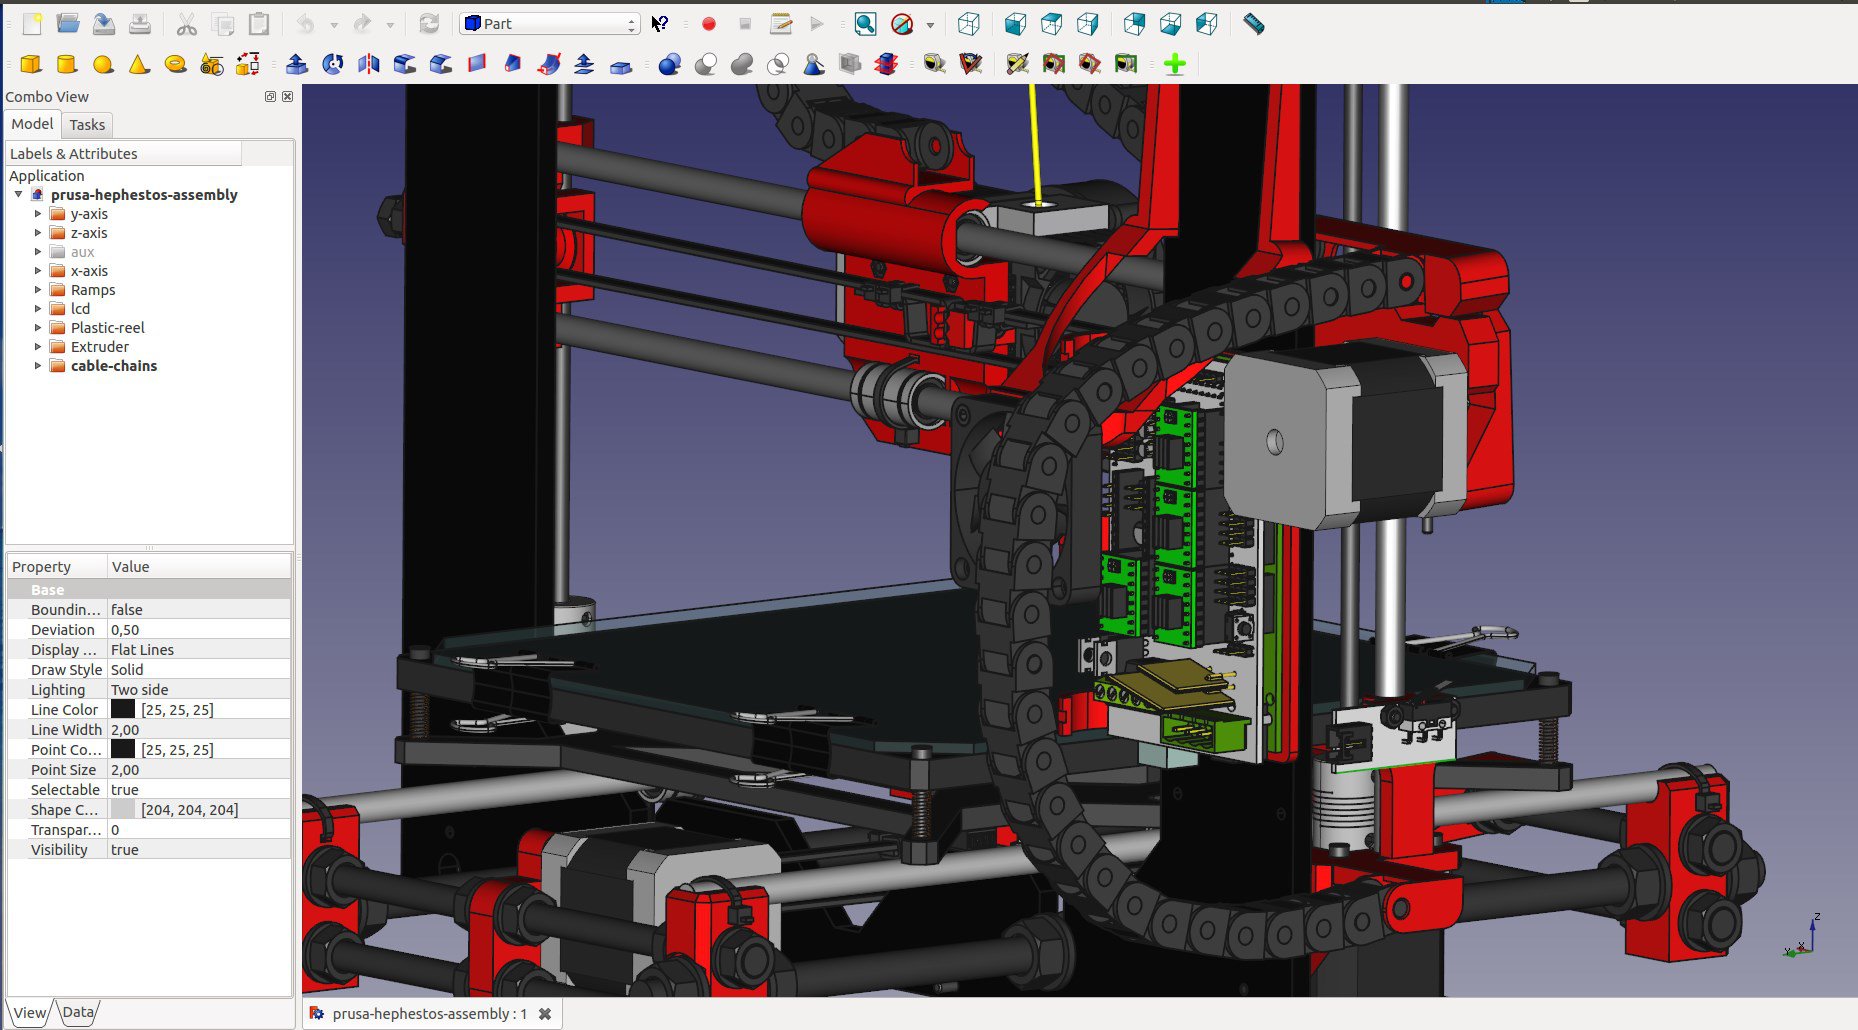 solidworks 2016 student download free